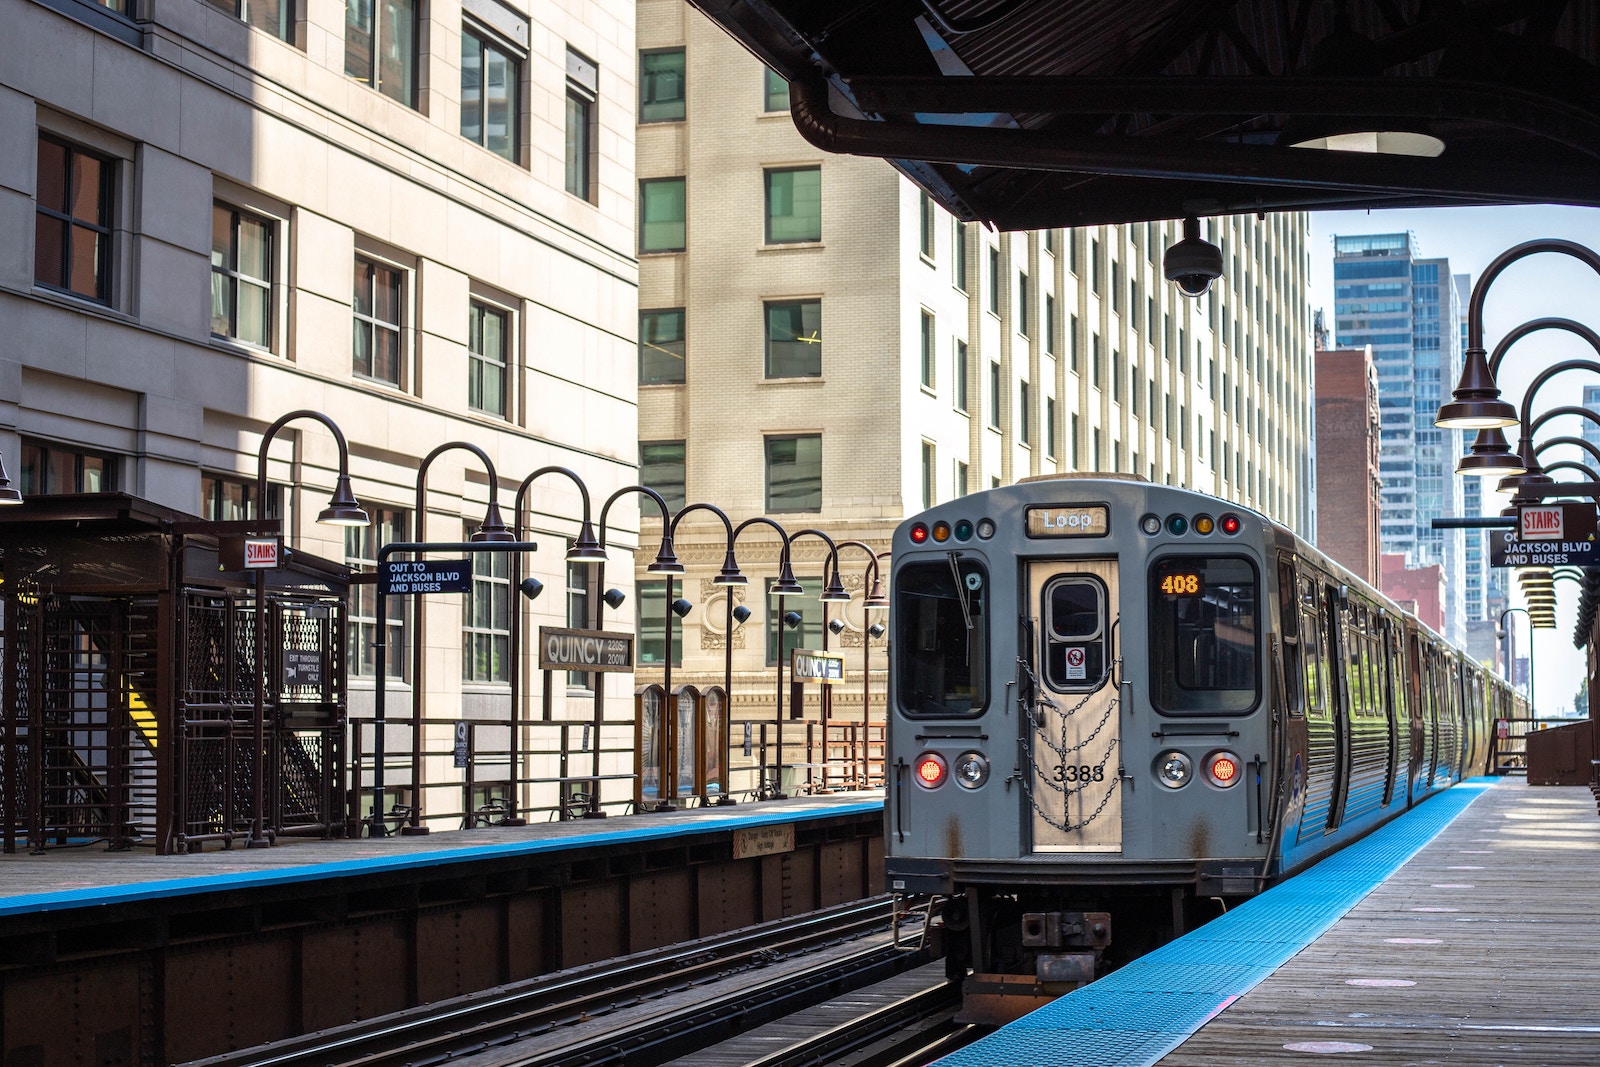 Why Doesn’t the U.S. Have Better Public Transportation?